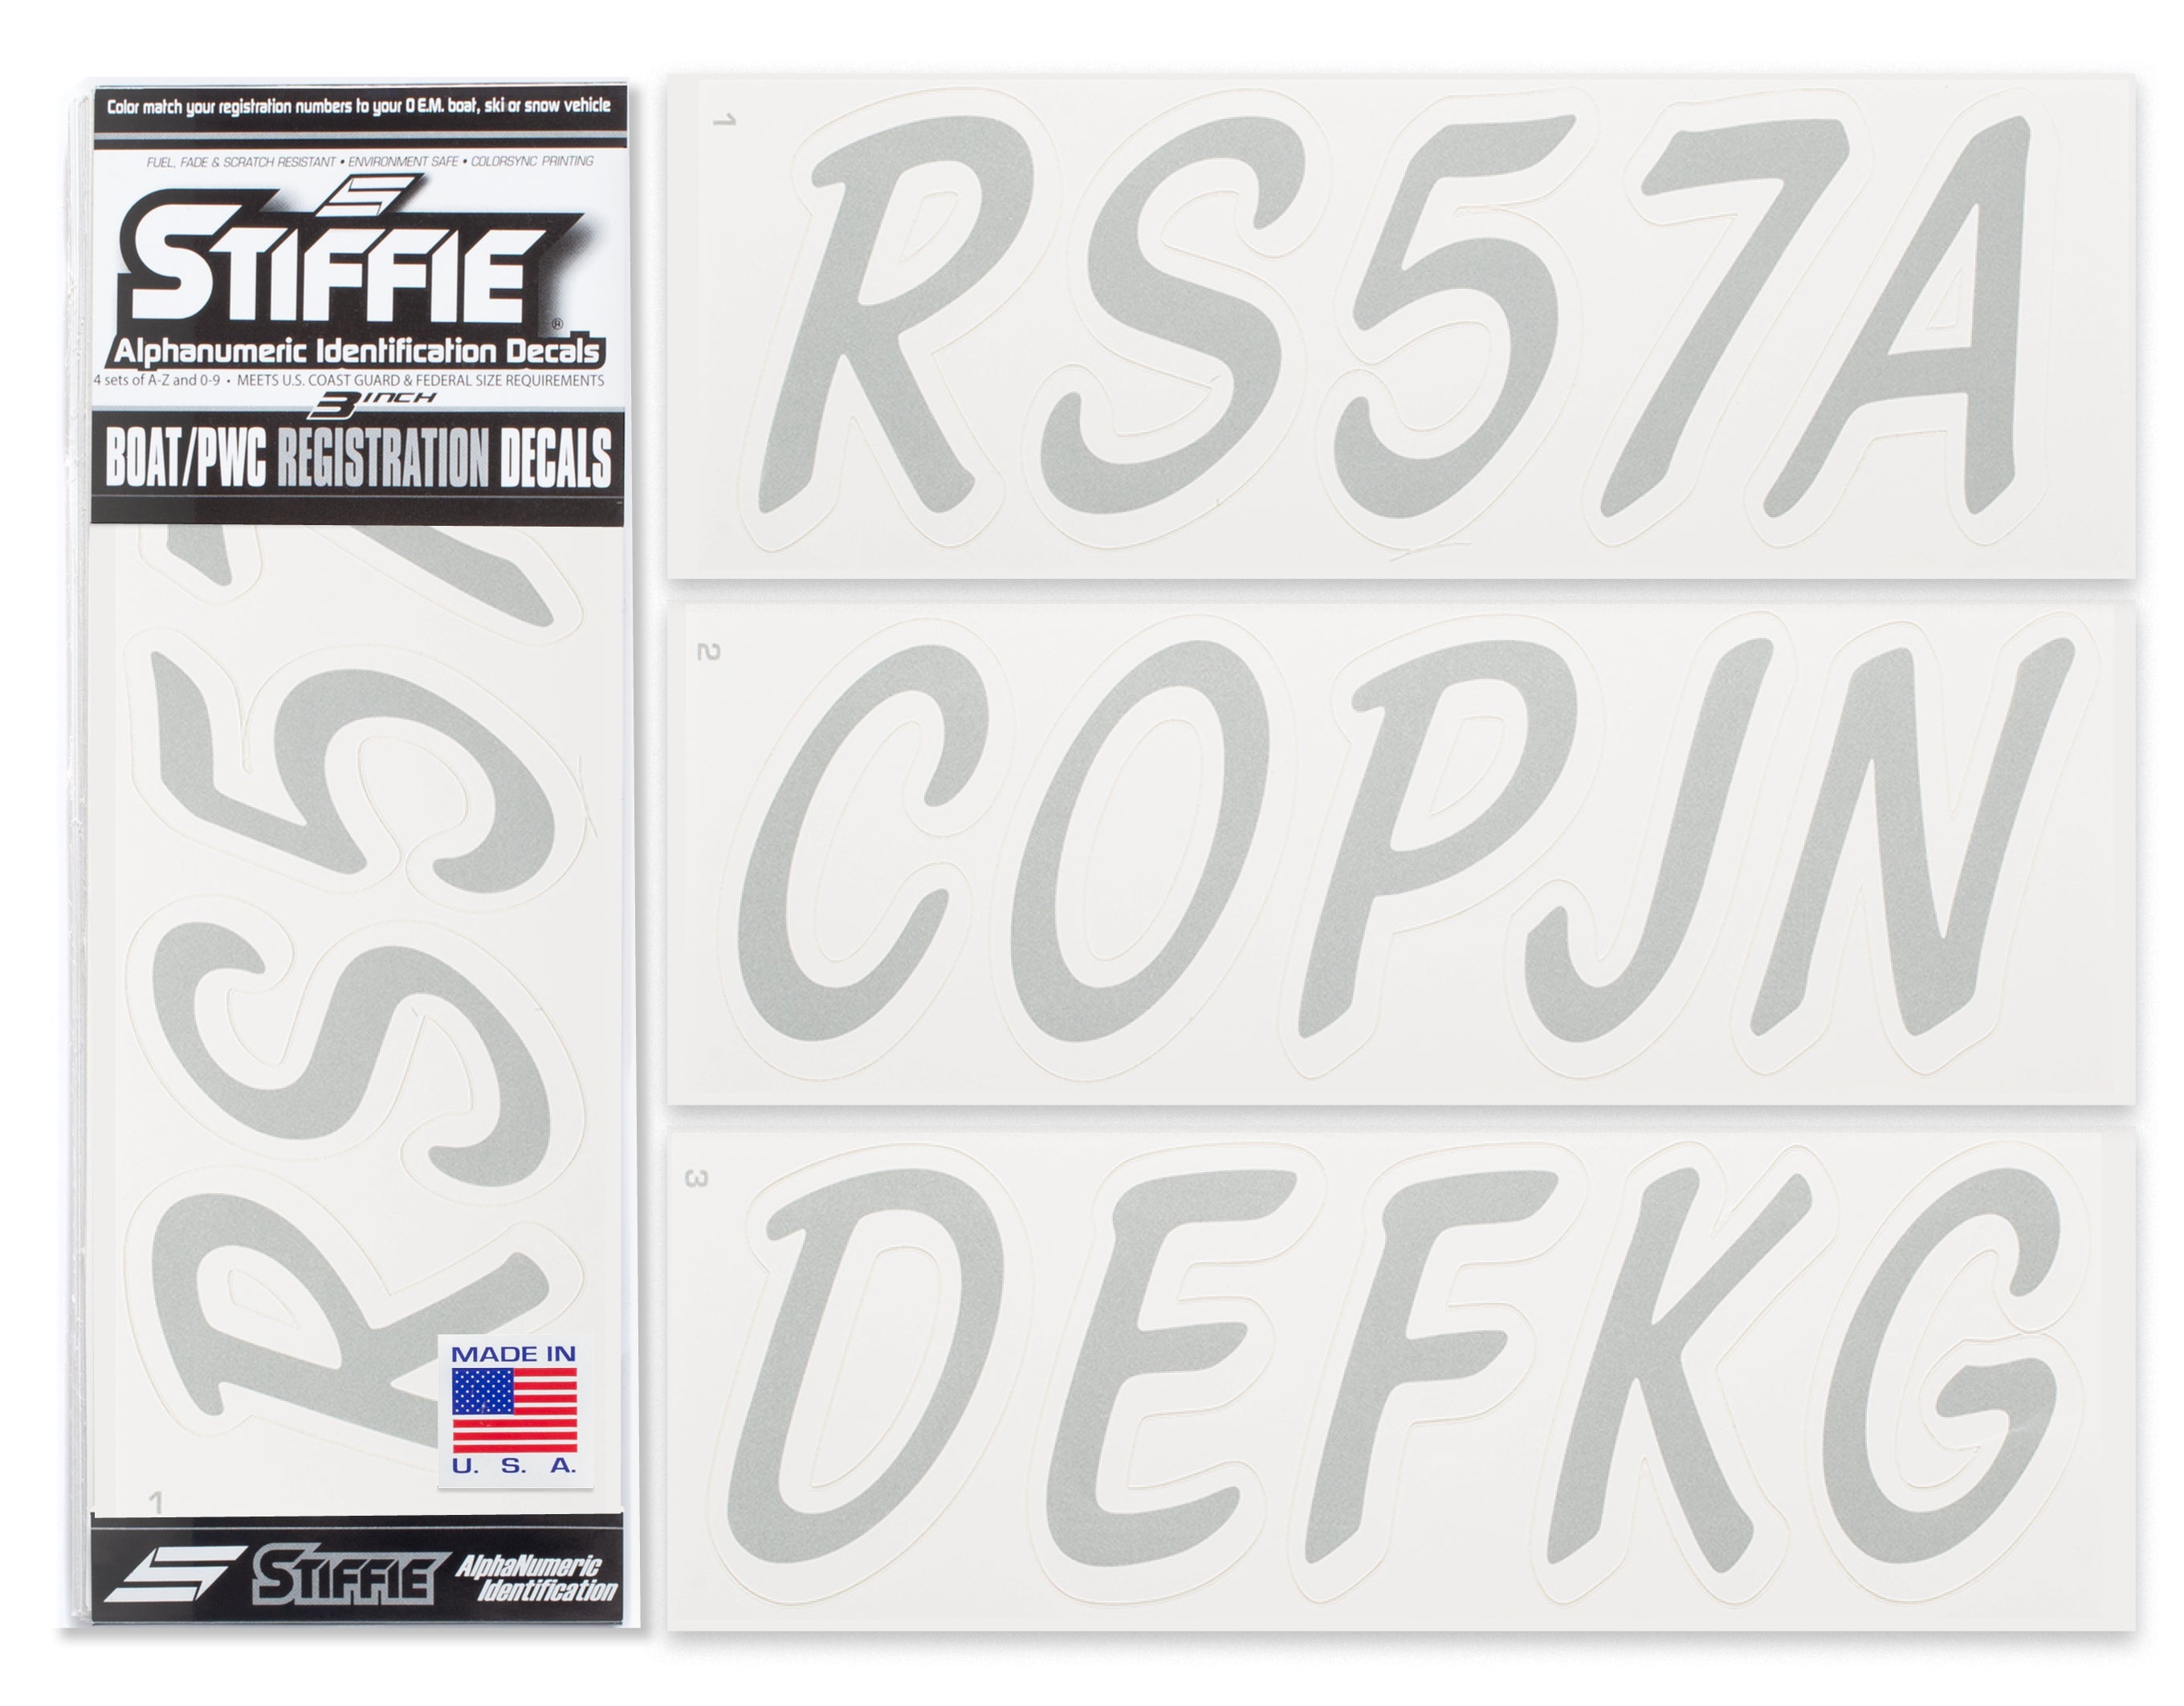 STIFFIE Whipline Solid Metallic Silver/White 3" Alpha-Numeric Registration Identification Numbers Stickers Decals for Boats & Personal Watercraft